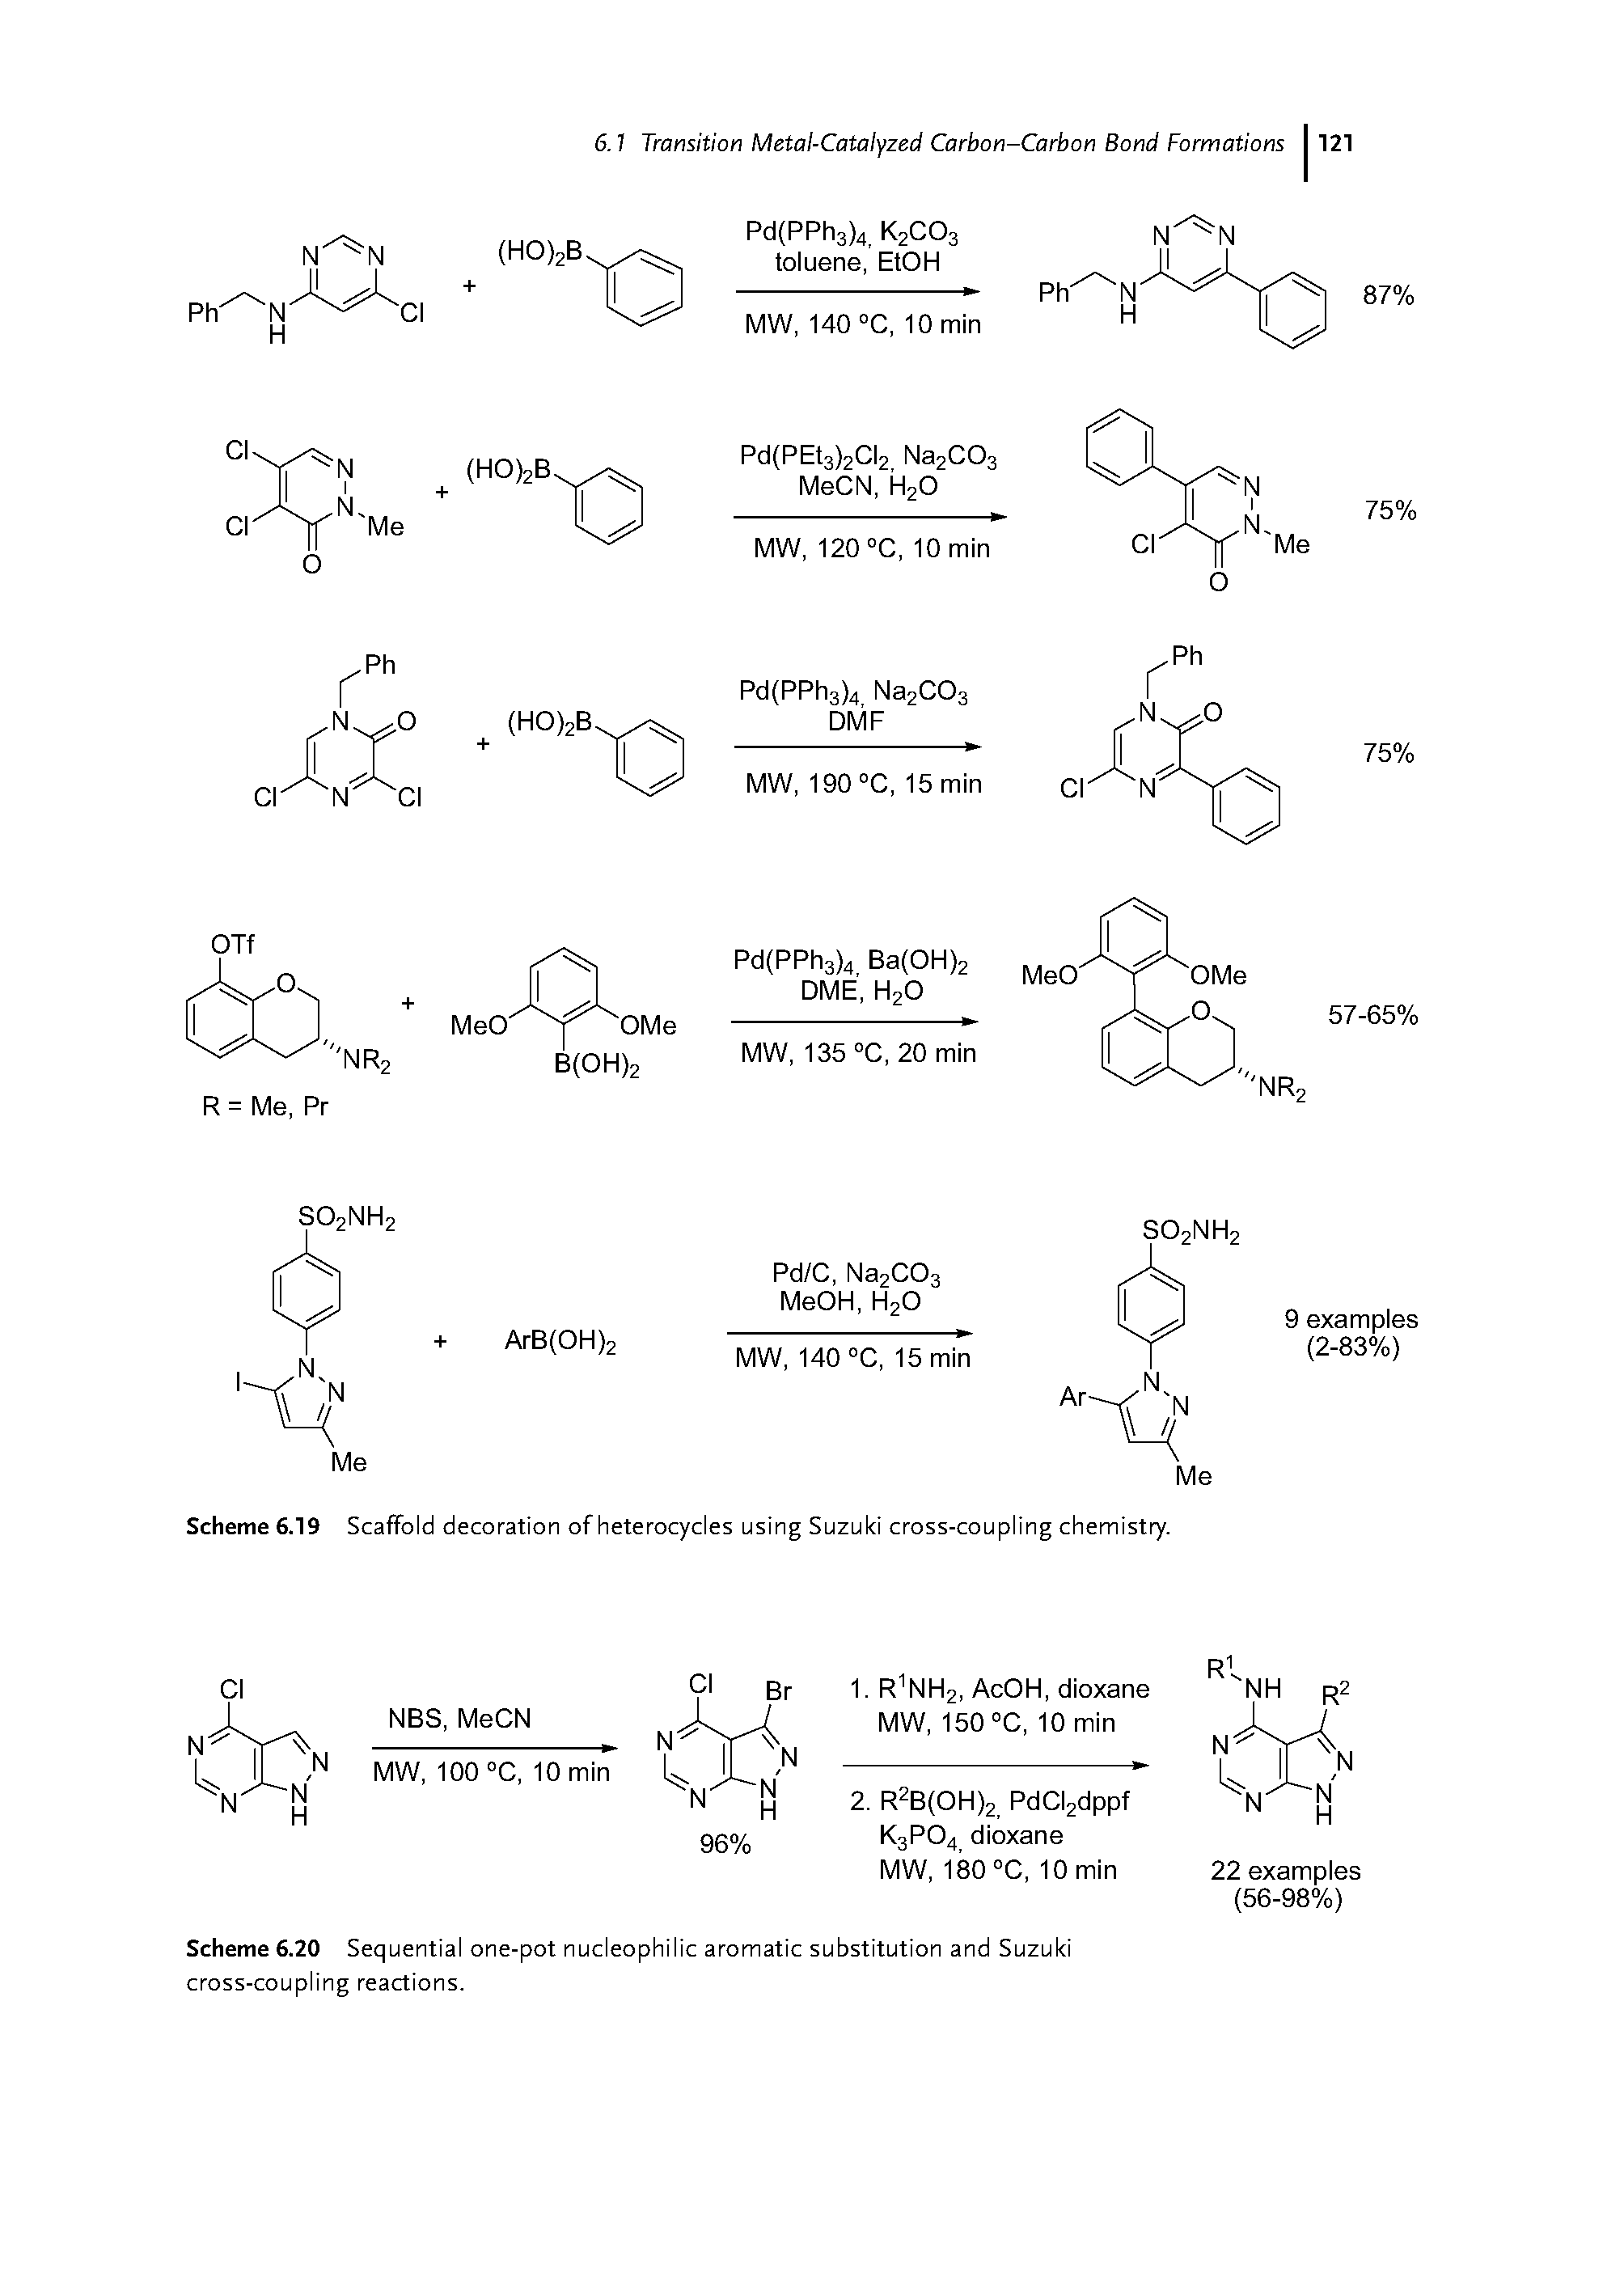 Scheme 6.20 Sequential one-pot nucleophilic aromatic substitution and Suzuki cross-coupling reactions.